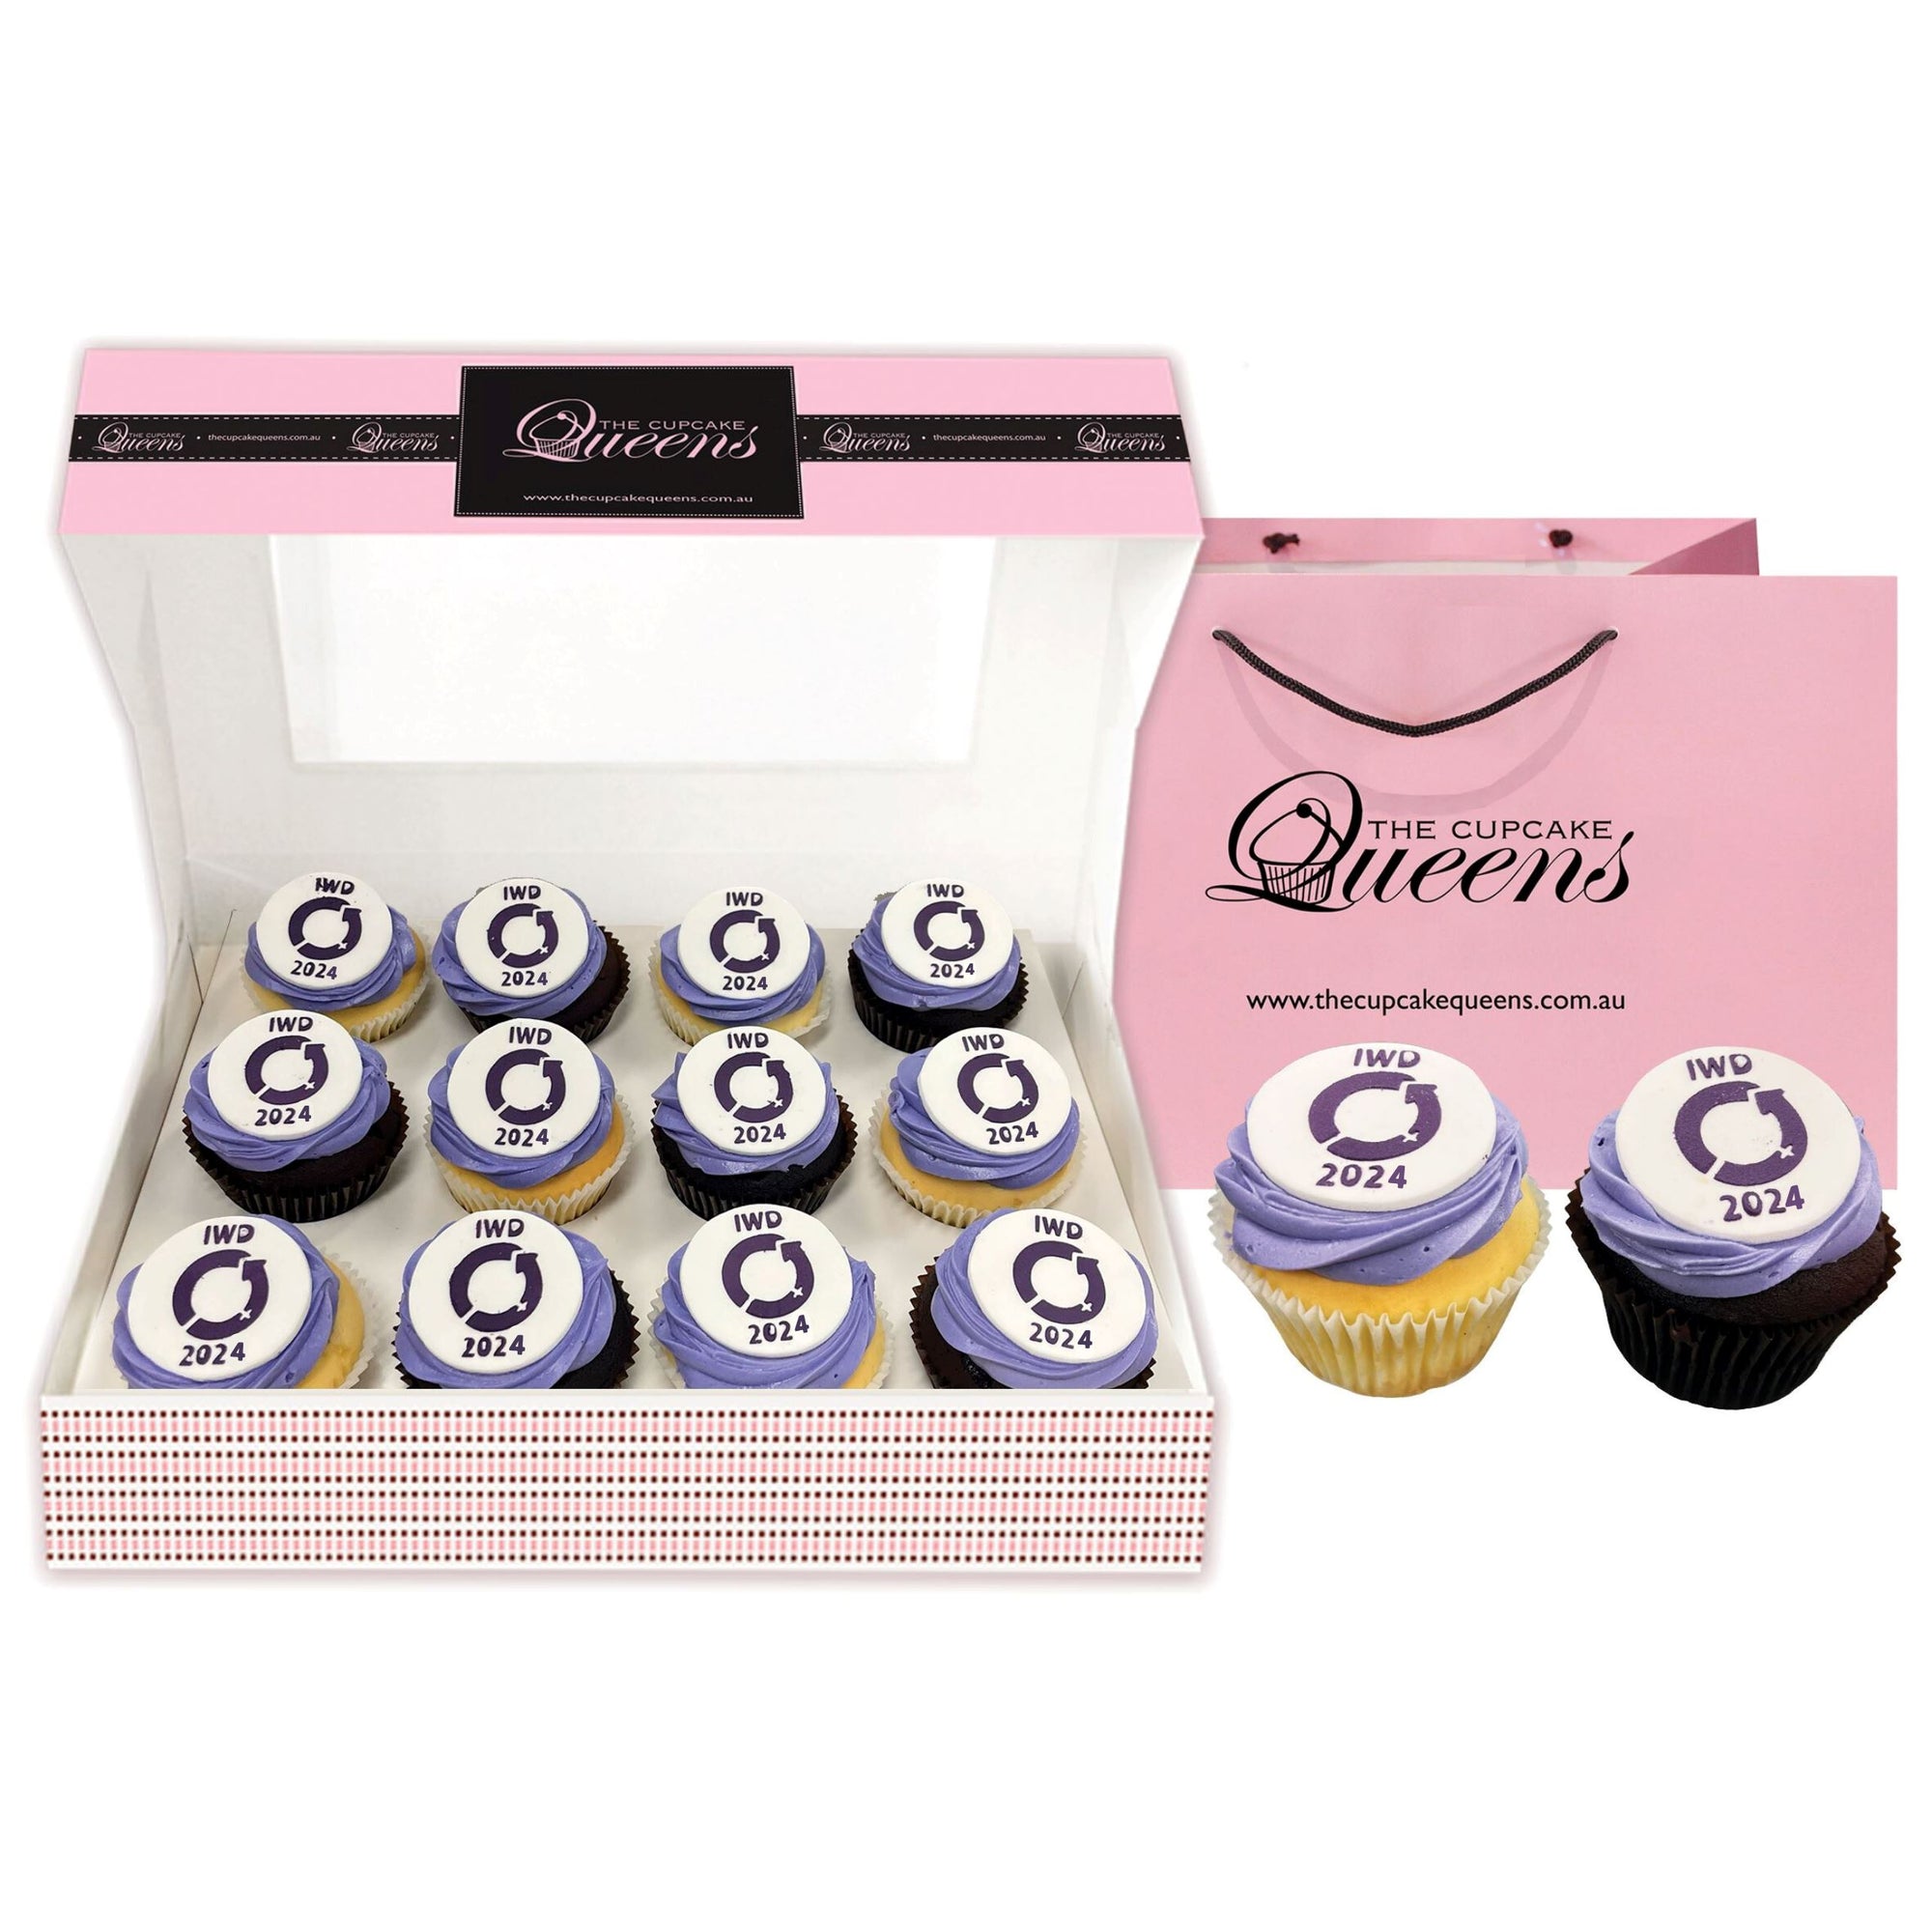 IWD 2024 Regular size Cupcake Giftbox Cupcakes Pre Selected Boxes The Cupcake Queens 